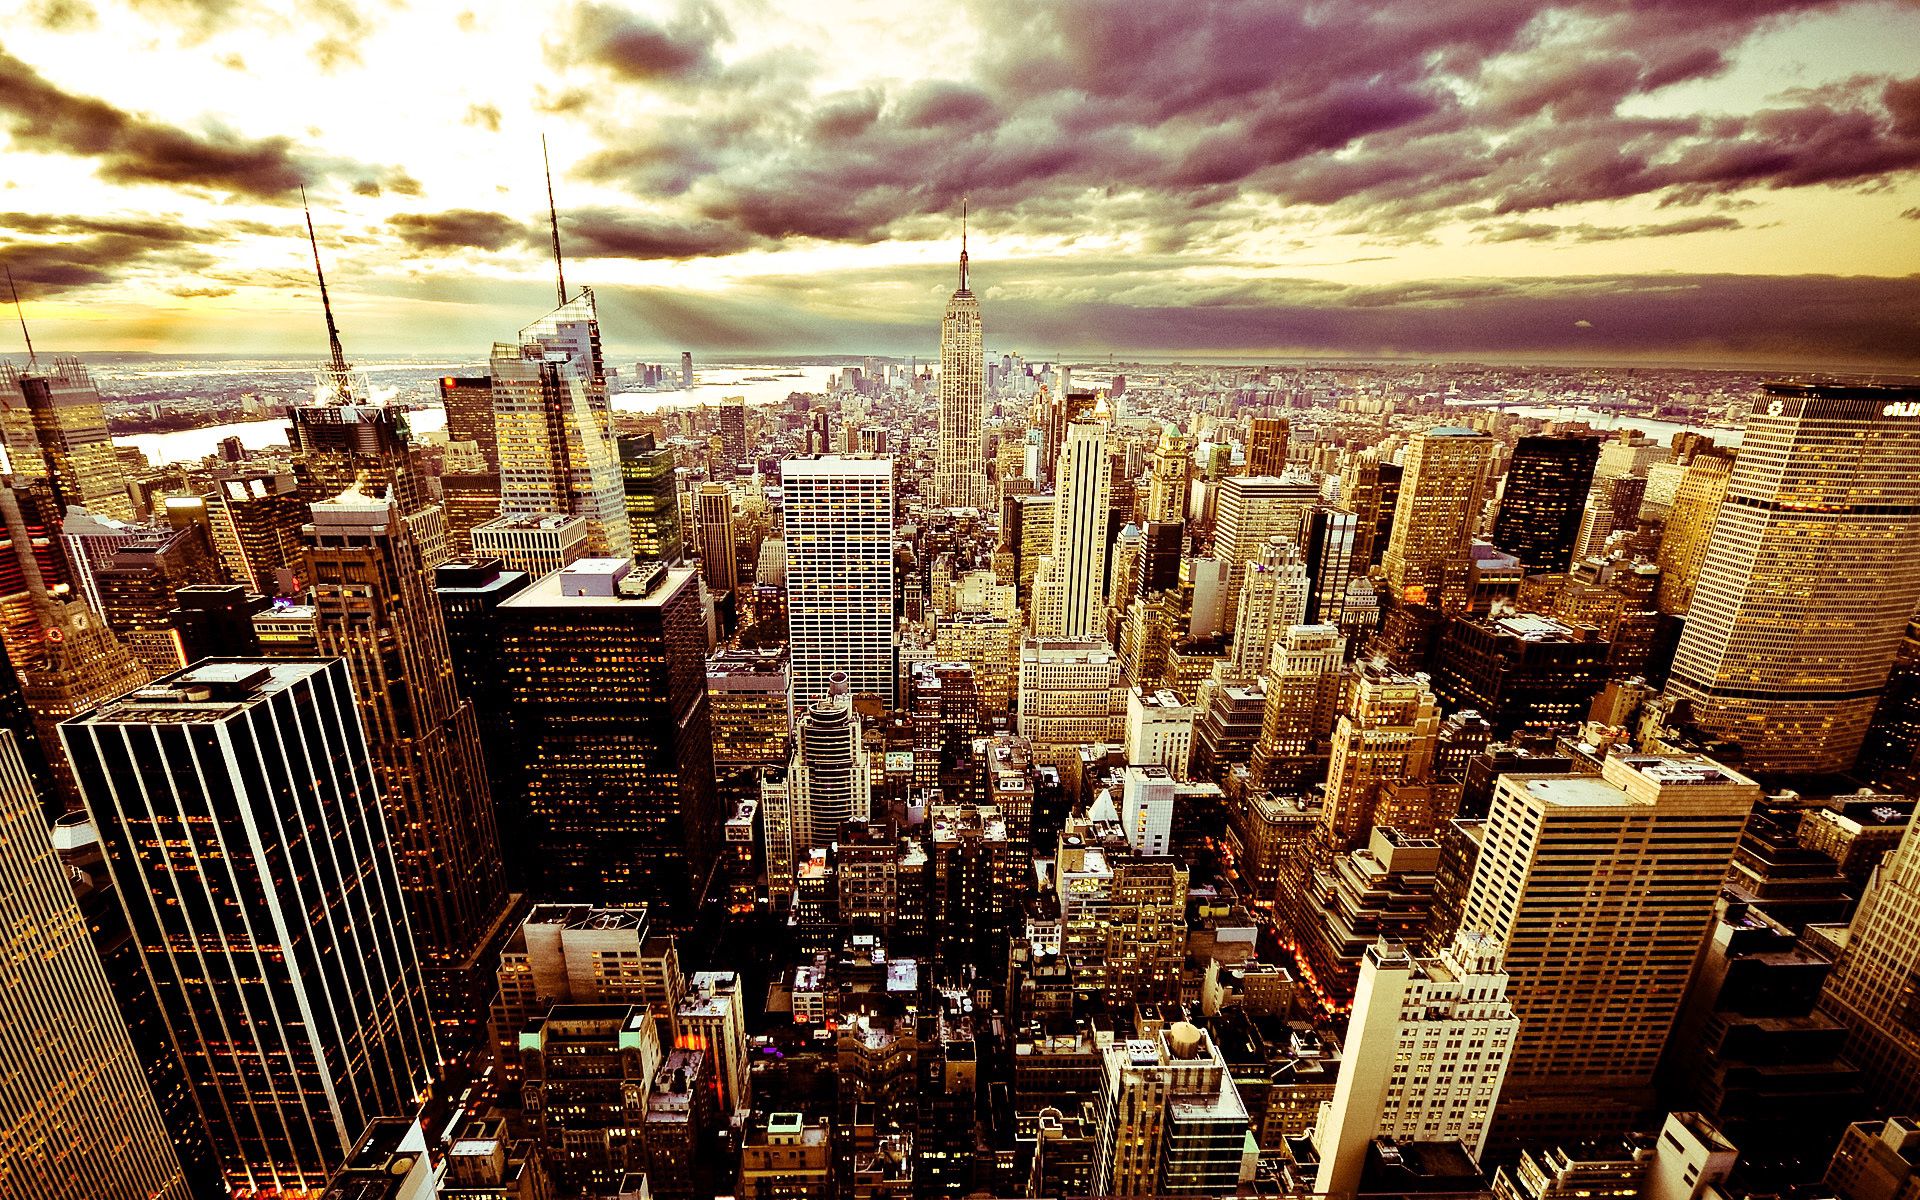 usa, america, skyscrapers, cities, sky, clouds, city, building, evening, united states, new york, handsomely, it's beautiful, ny for android